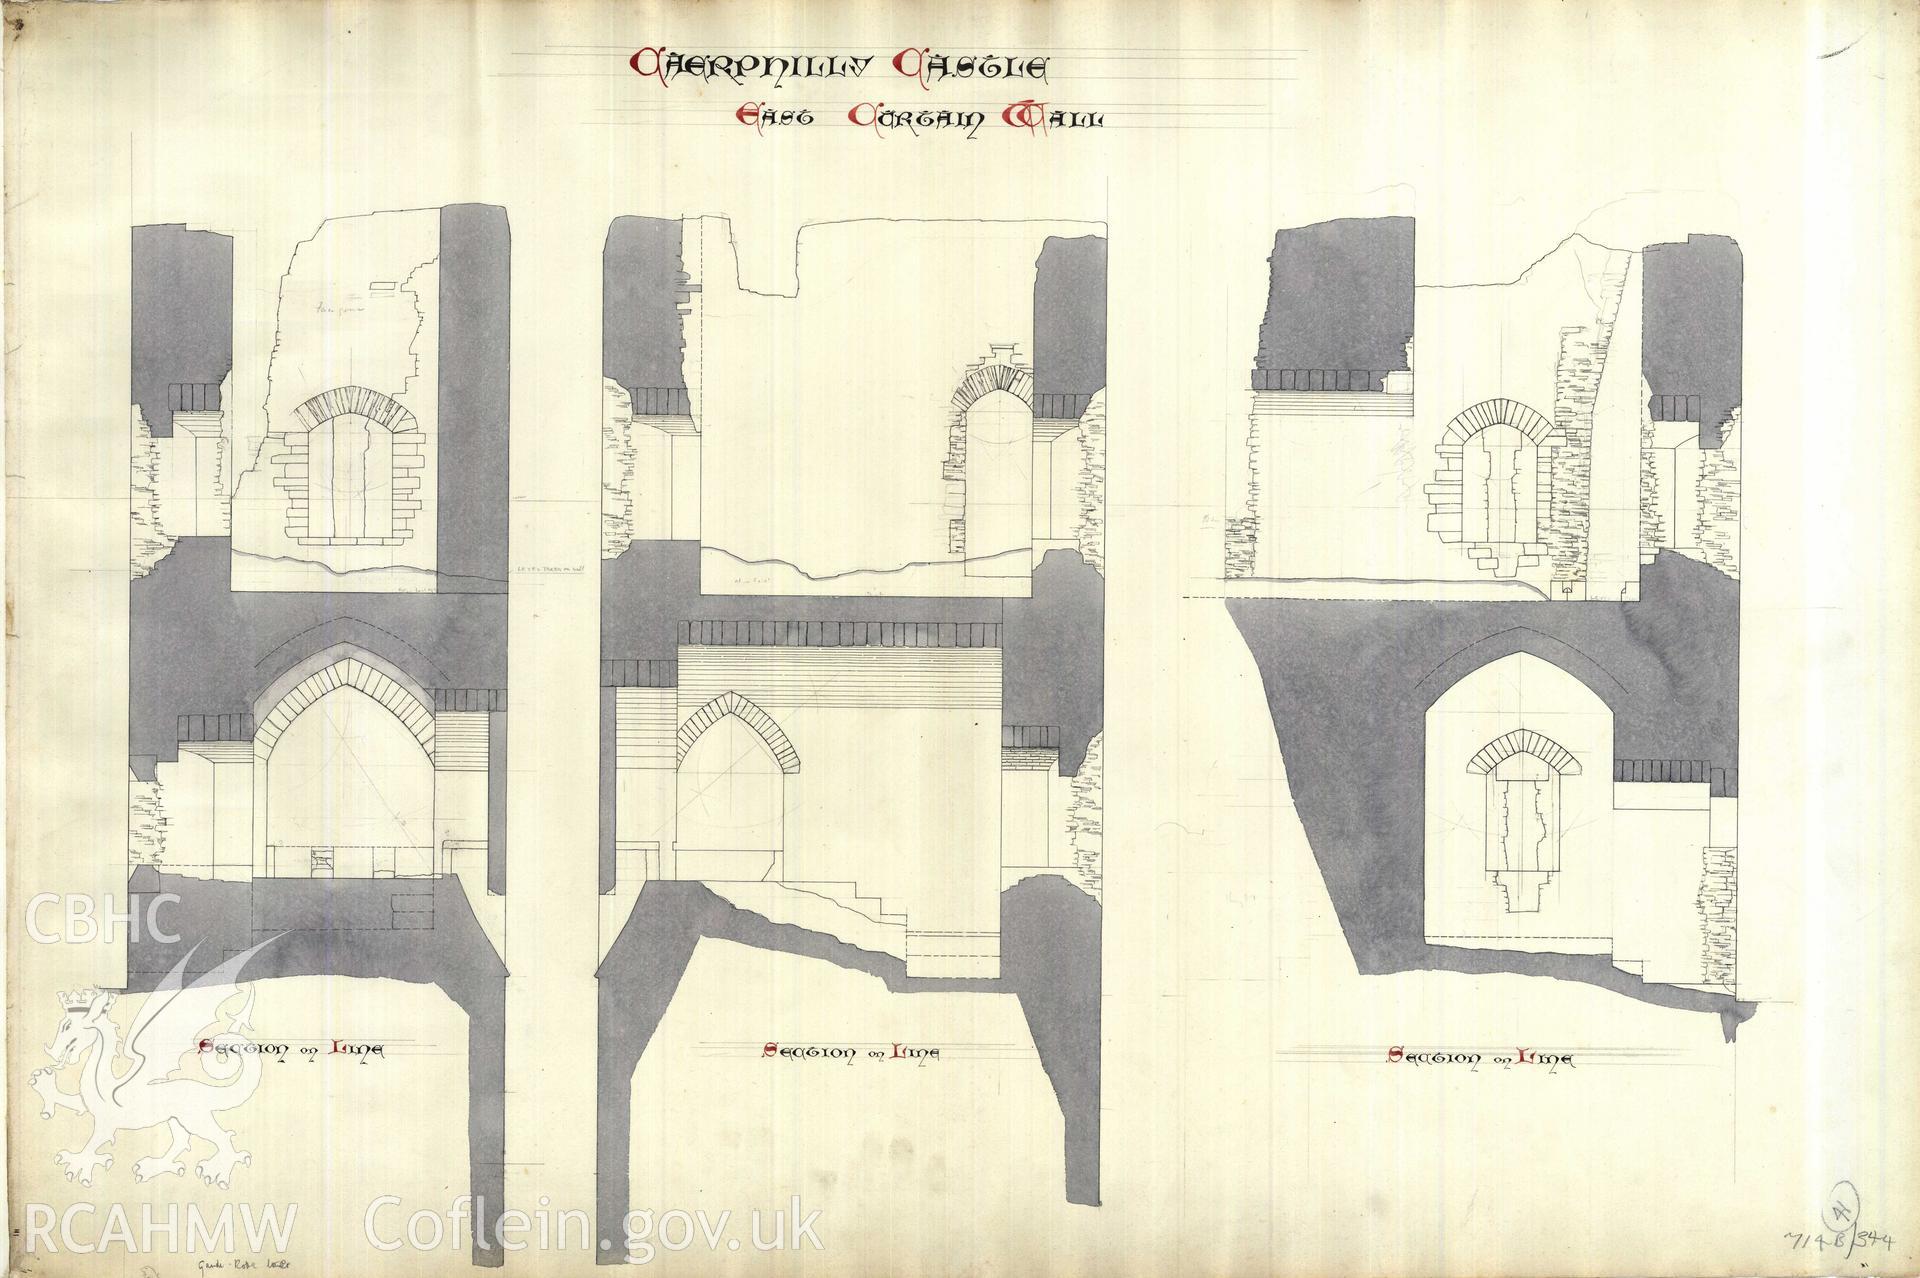 Cadw guardianship monument drawing of Caerphilly Castle. East Curtain Wall, sections Cadw Ref. No:714B/344. Scale 1:24.